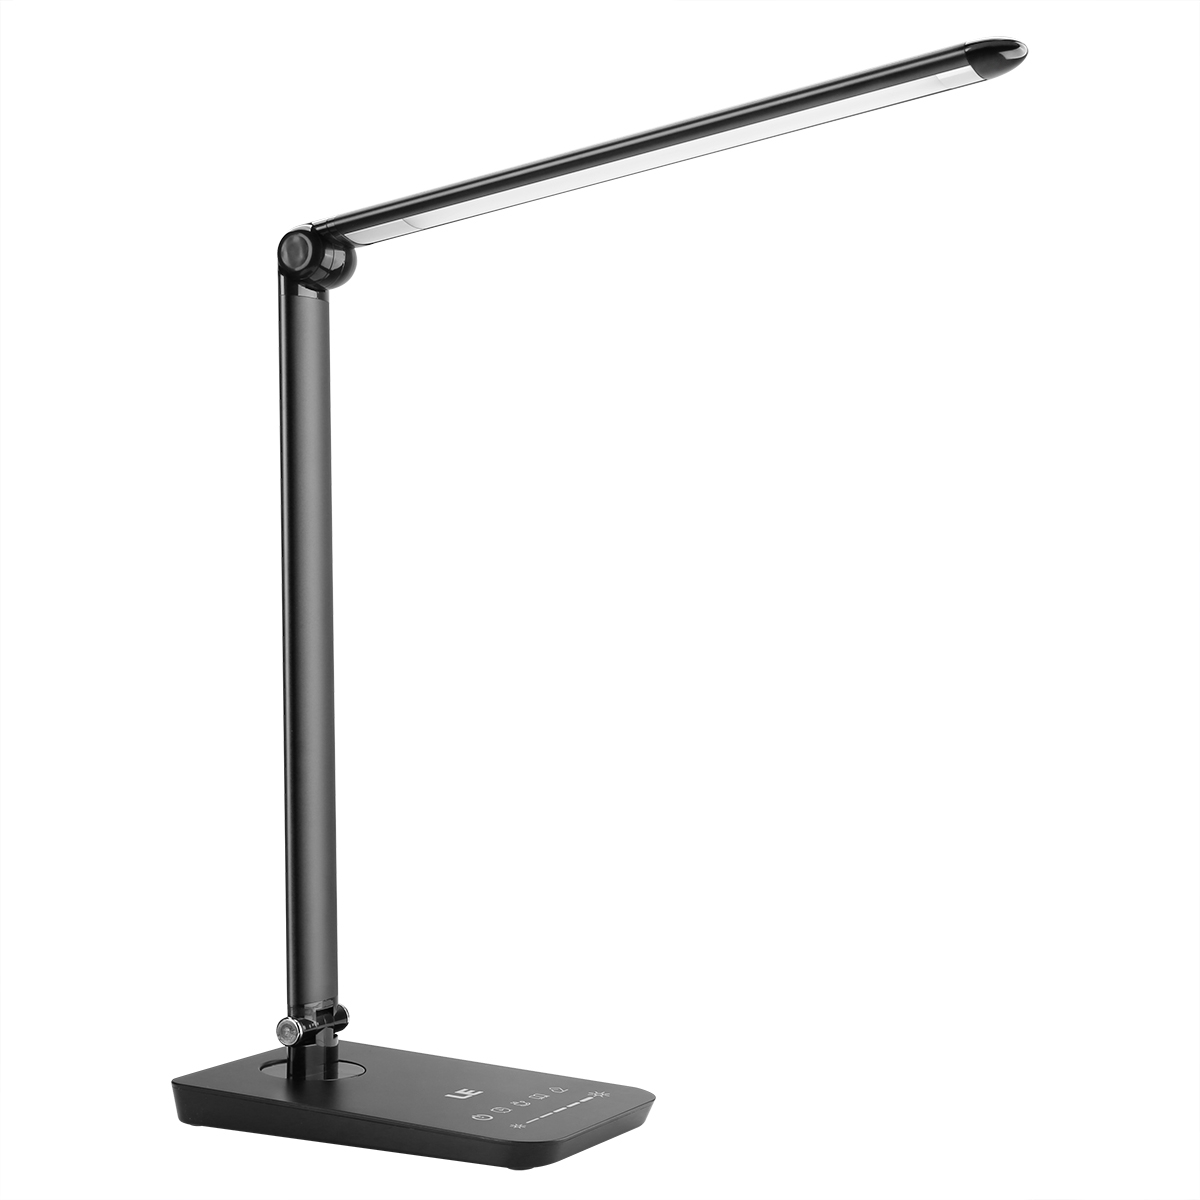 Lighting Ever Led Desk Lamp With Usb Charging Port Timer 3 Color Modes X 7 Level Brightness Dimmable Led Table Lamp Eye Care Touch Lamp For Back pertaining to size 1200 X 1200